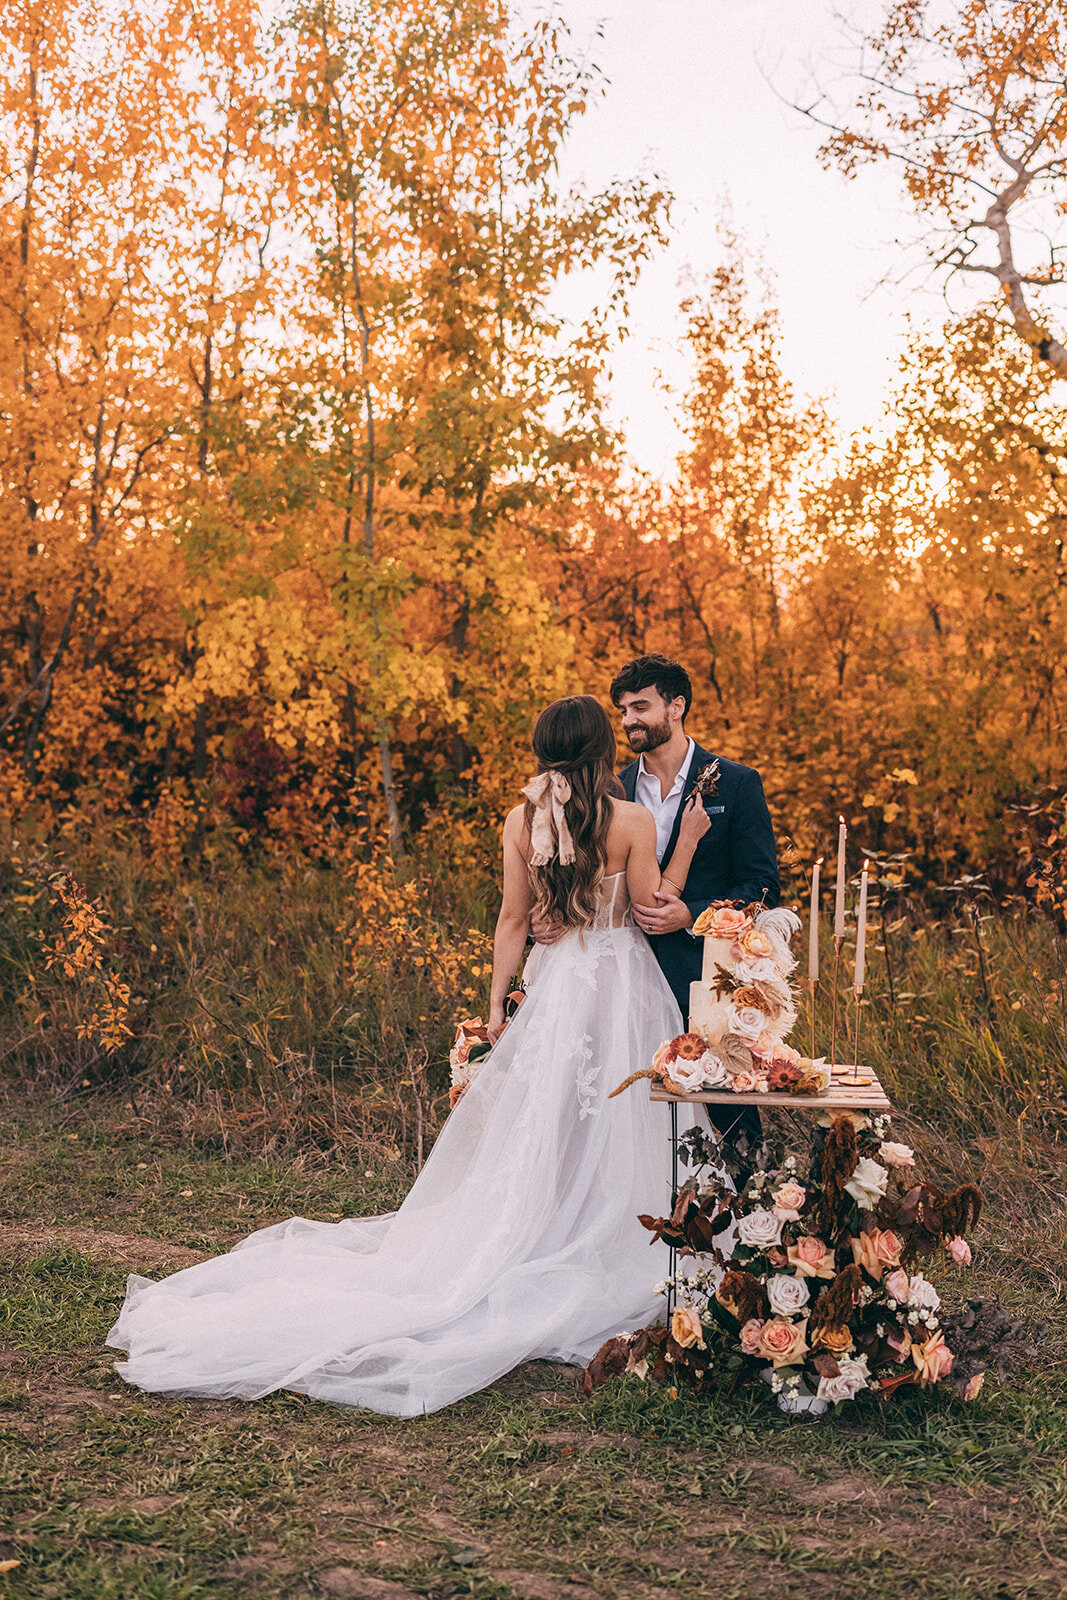 Bride and groom at their Fall wedding at River's Edge, a picturesque country wedding venue in Devon, Alberta, featured on the Brontë Bride Vendor Guide.